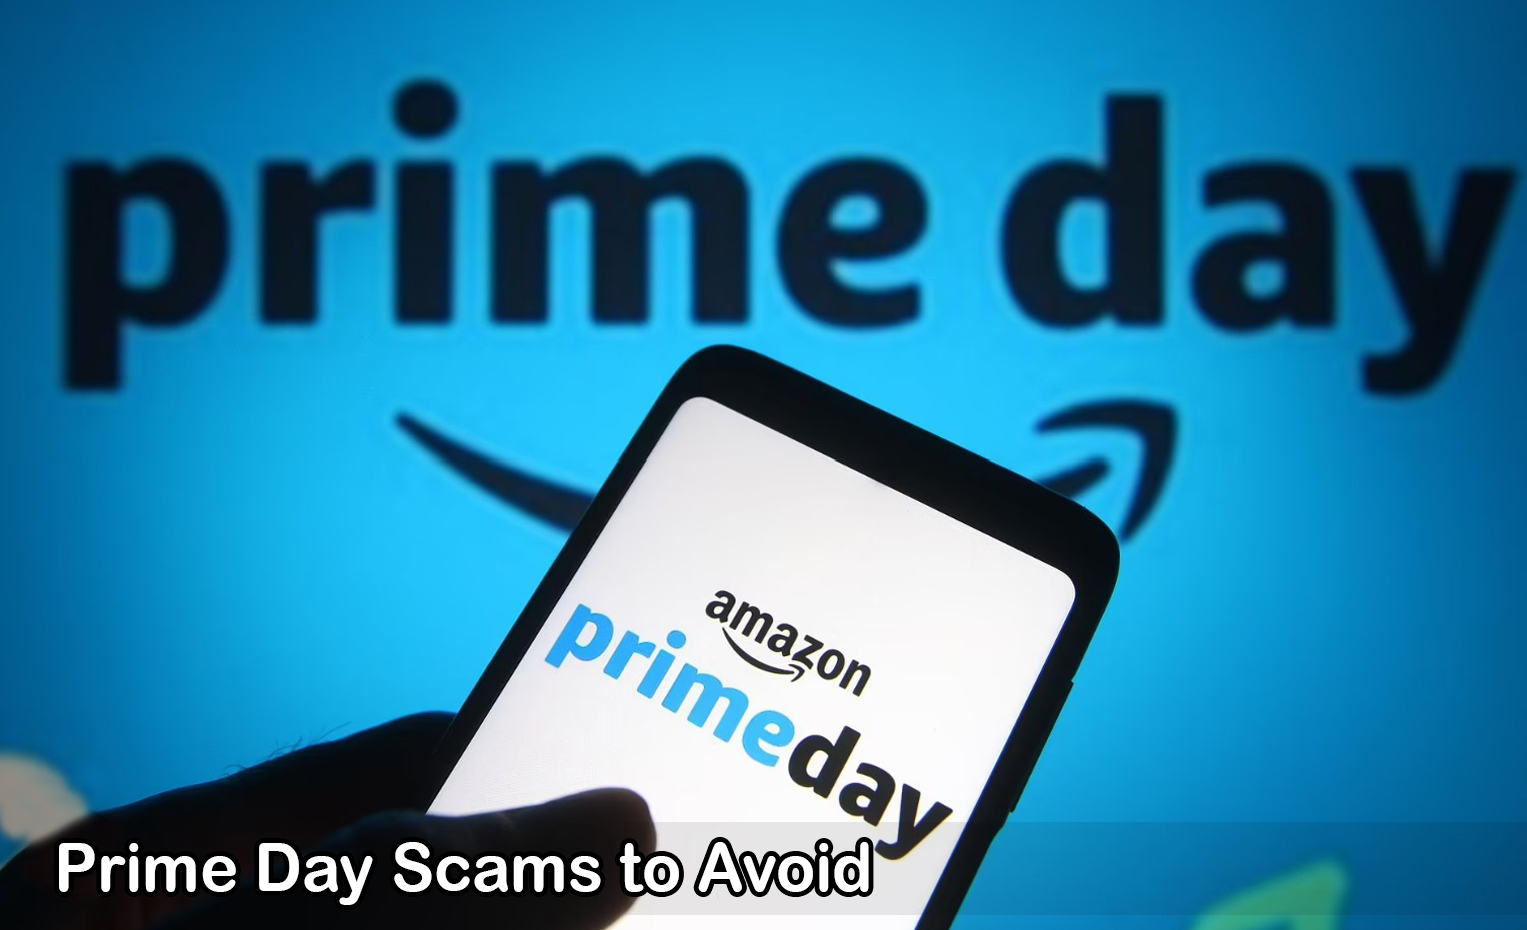 Prime Day Scams to Avoid